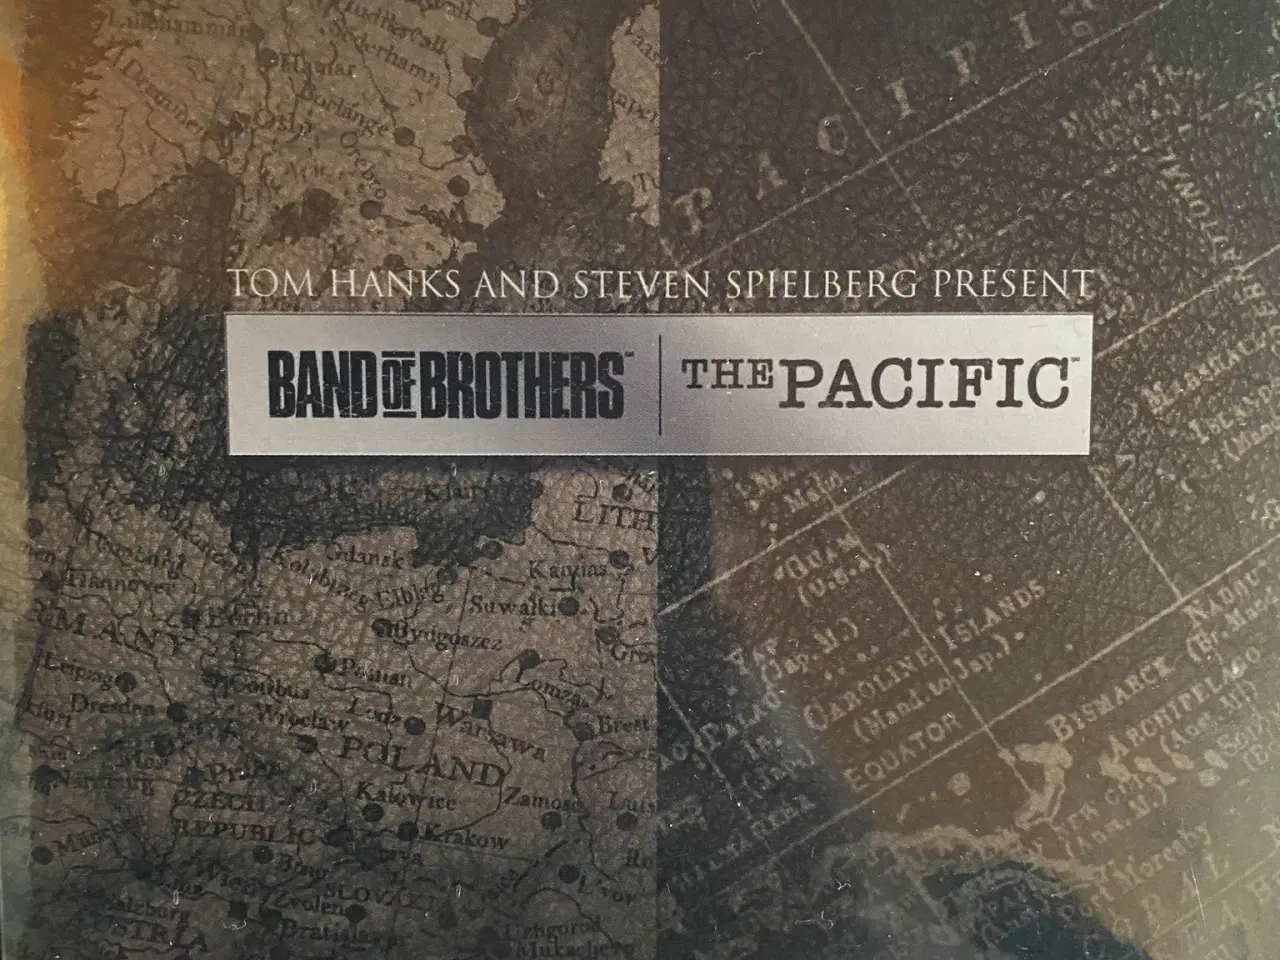 Billede 1 - NY NY "Band of Brothers" og "The Pacific" Blu-ray